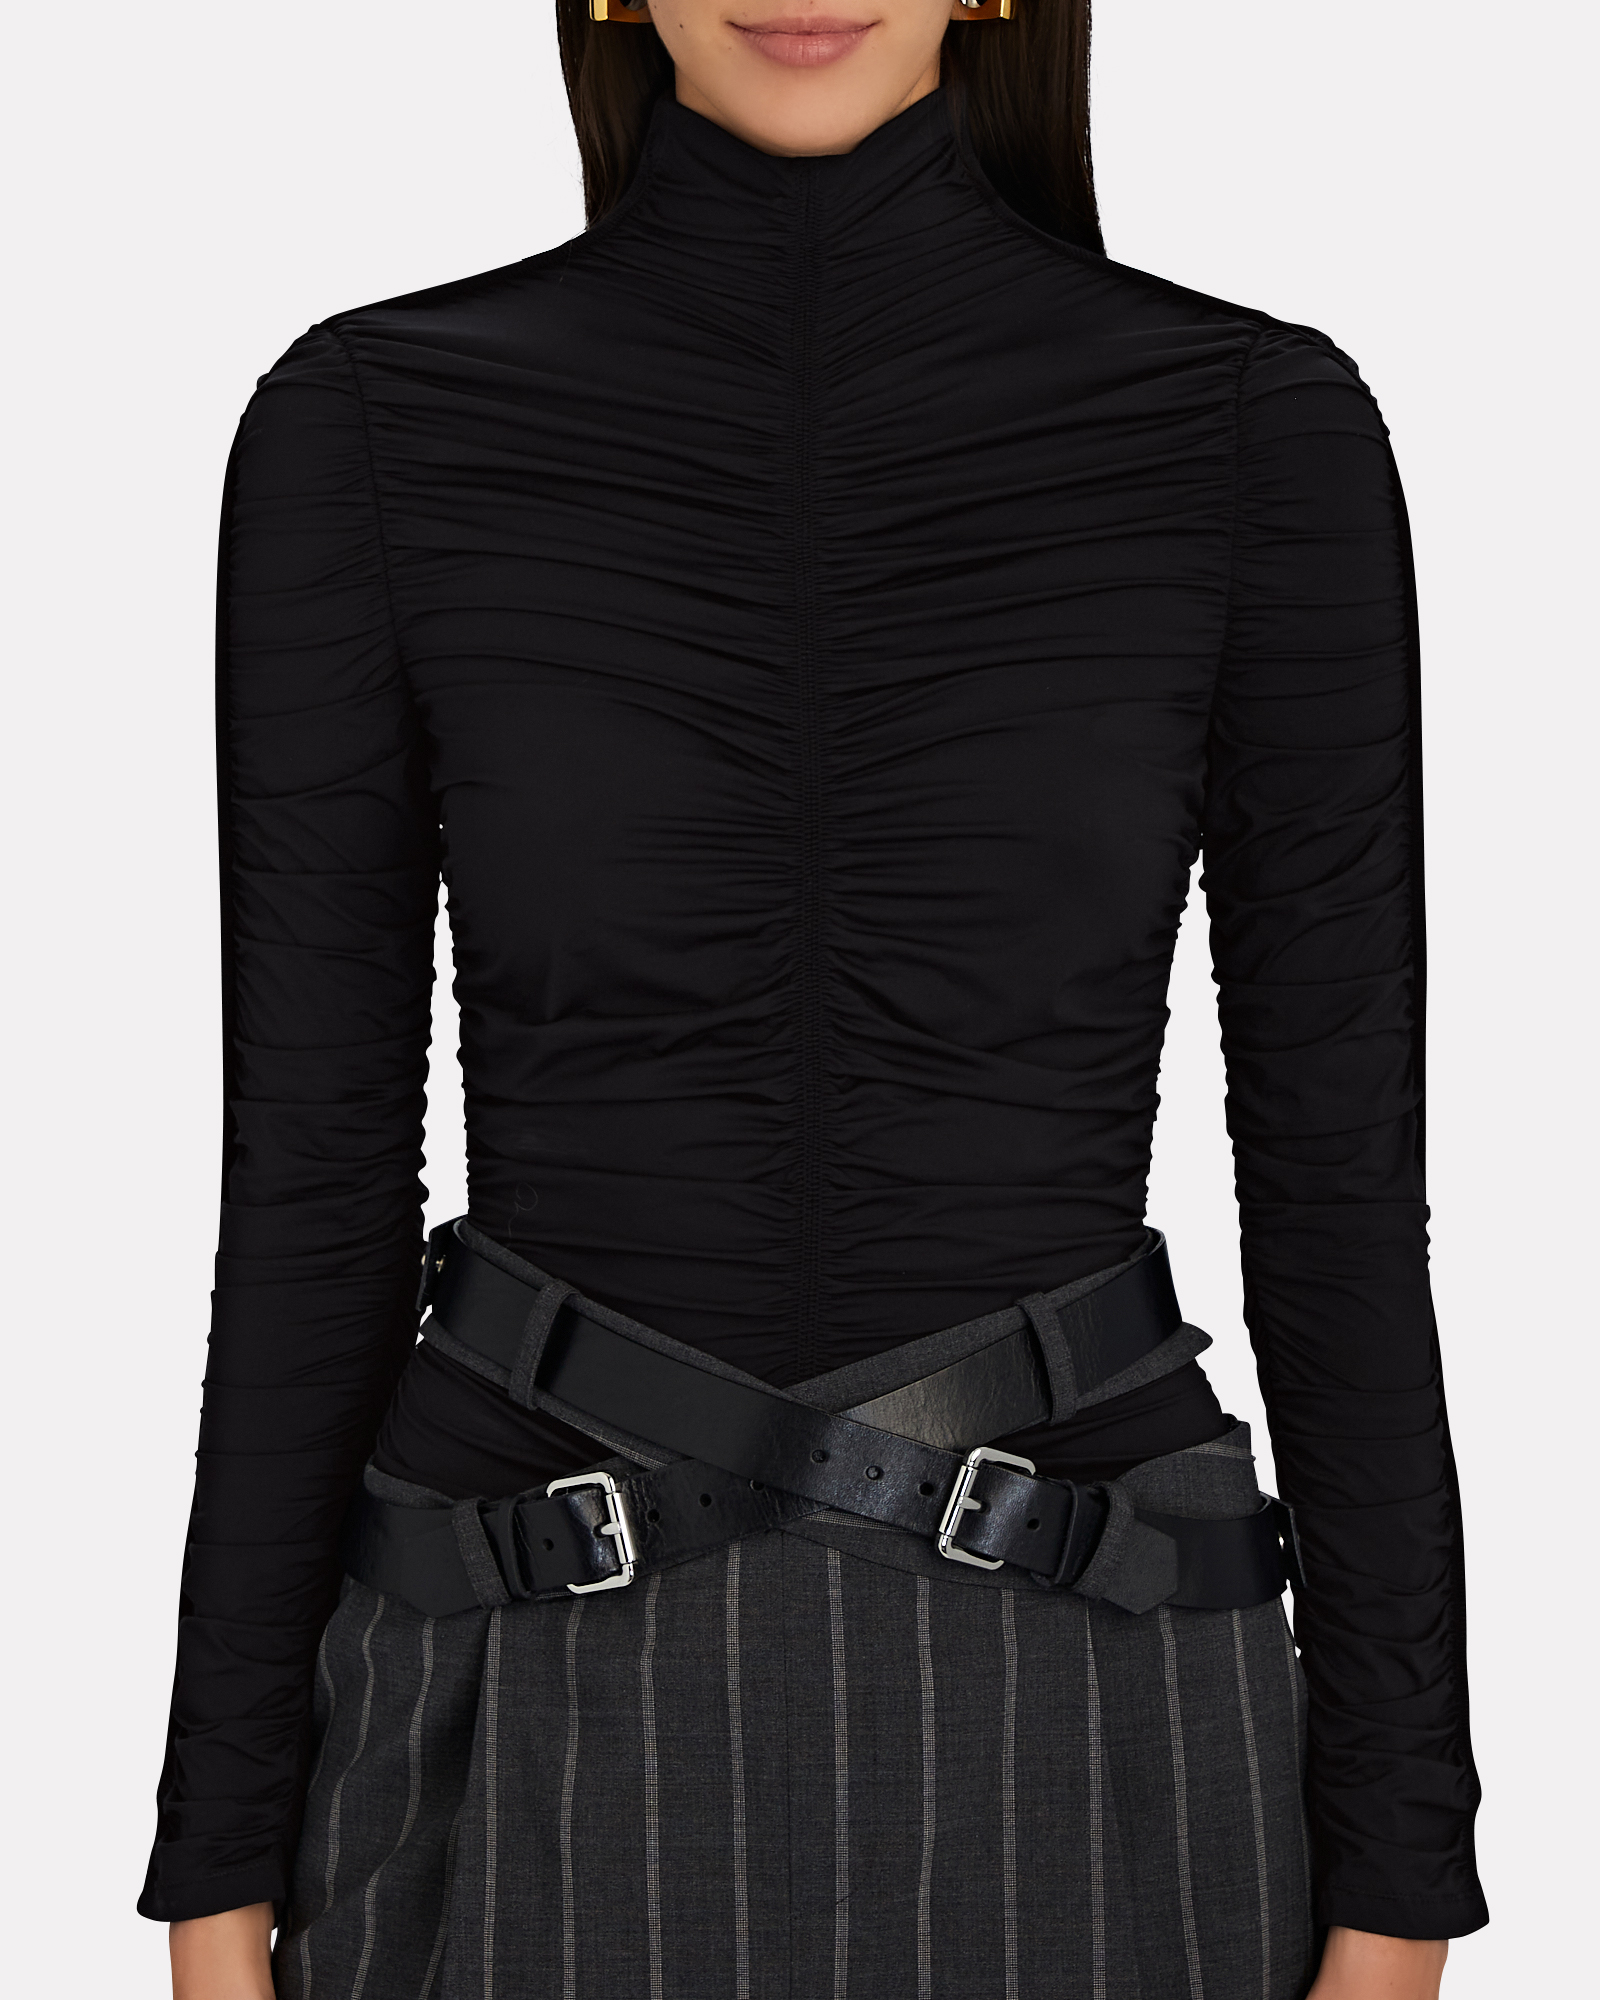 Alexander Wang Ruched Turtleneck Top In Black | INTERMIX®